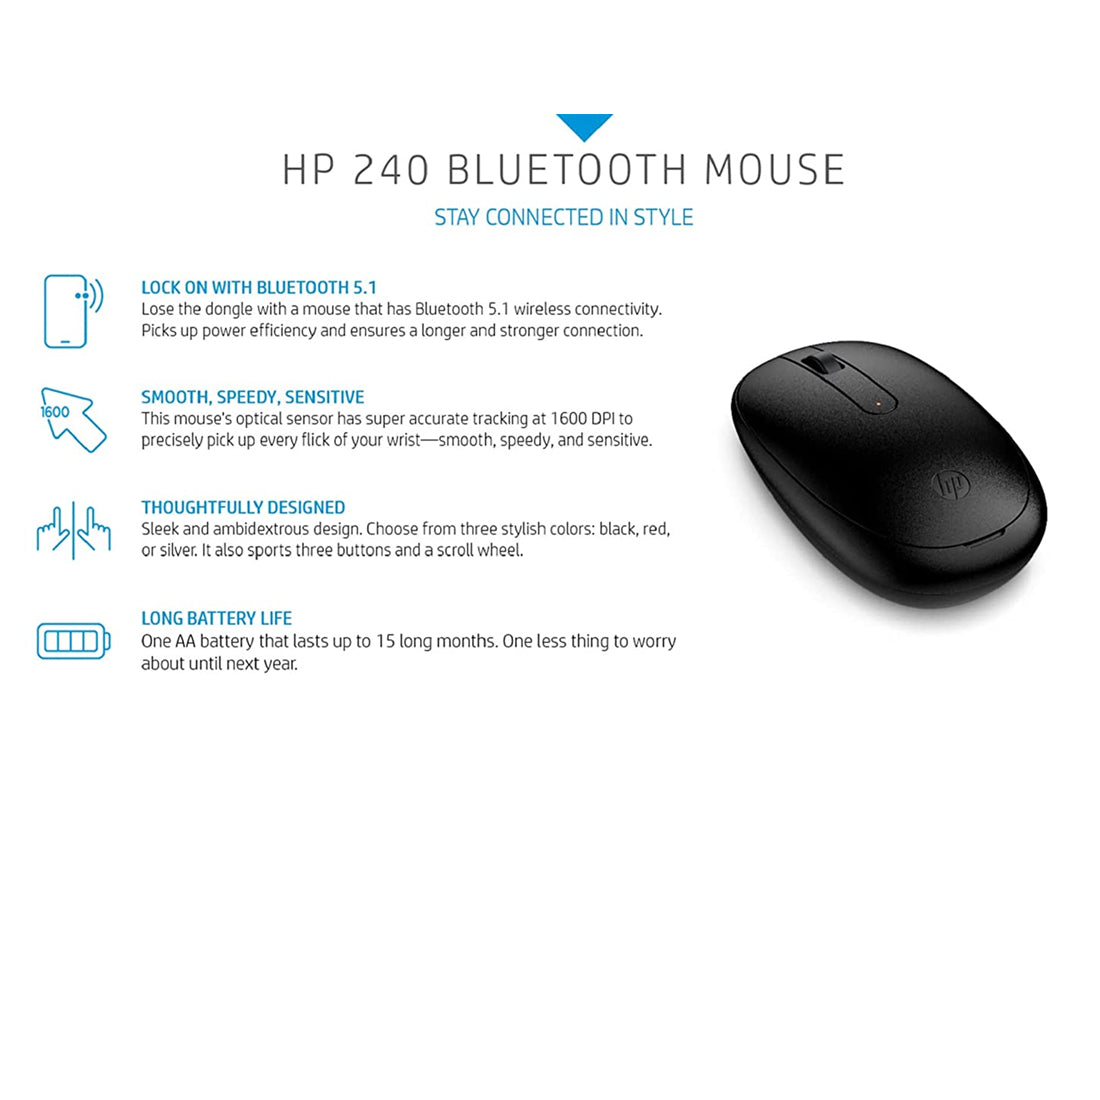 HP 240 Bluetooth Optical Mouse with 1600 DPI and 3 Buttons